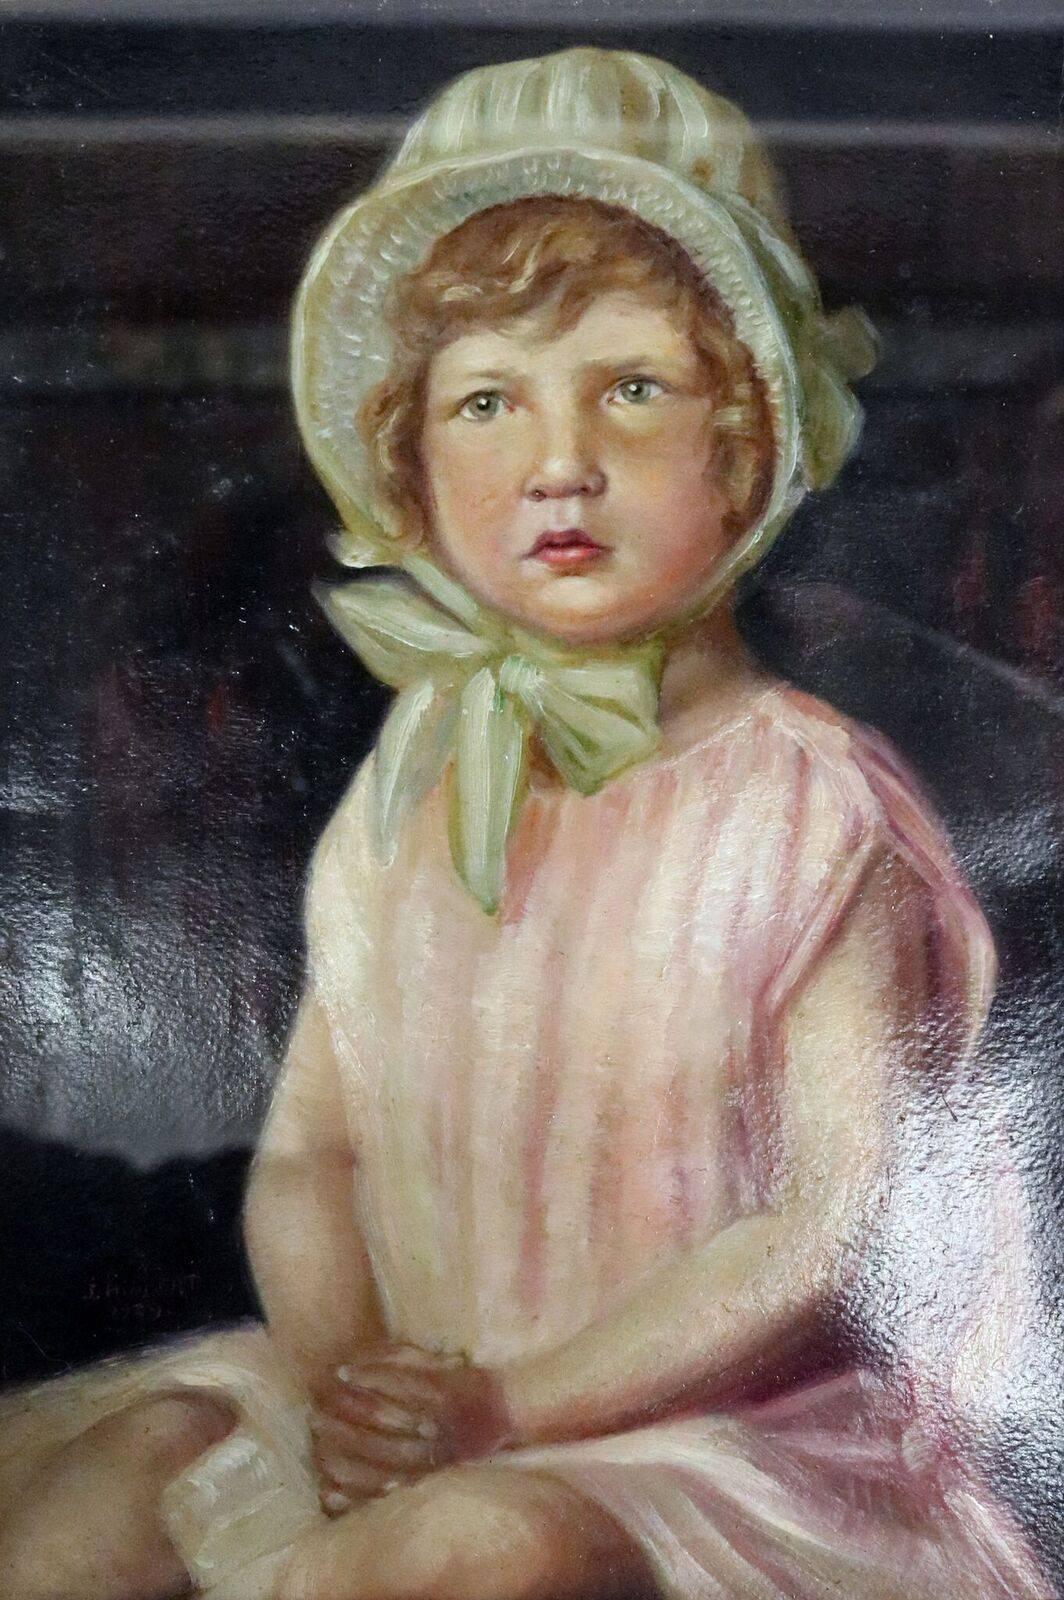 Antique framed oil on canvas painting of young girl in a bonnet and pink gown by listed artist Joseph Hilpert (1895-1975), signed and dated lower left, 1929.
Measures: 15